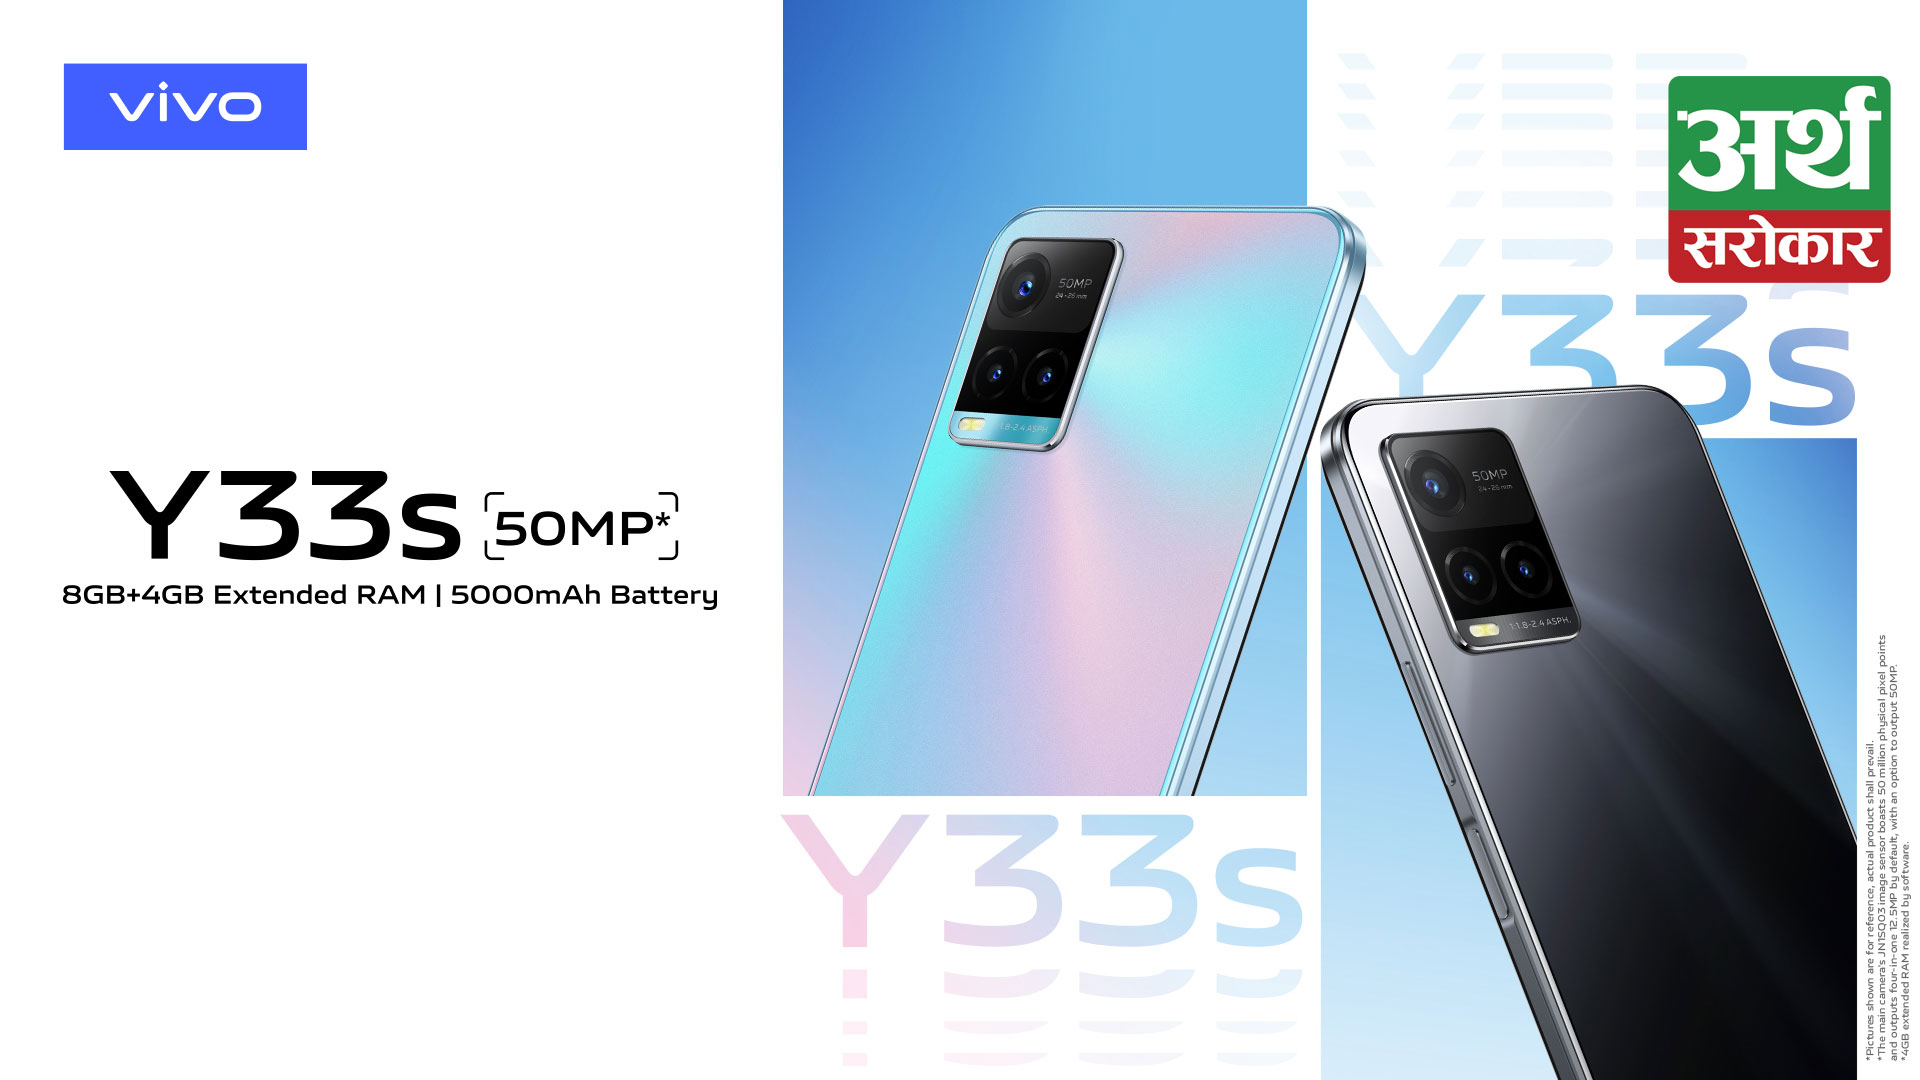 Top Reasons That Make vivo Y33s The Most Desirable In 2022